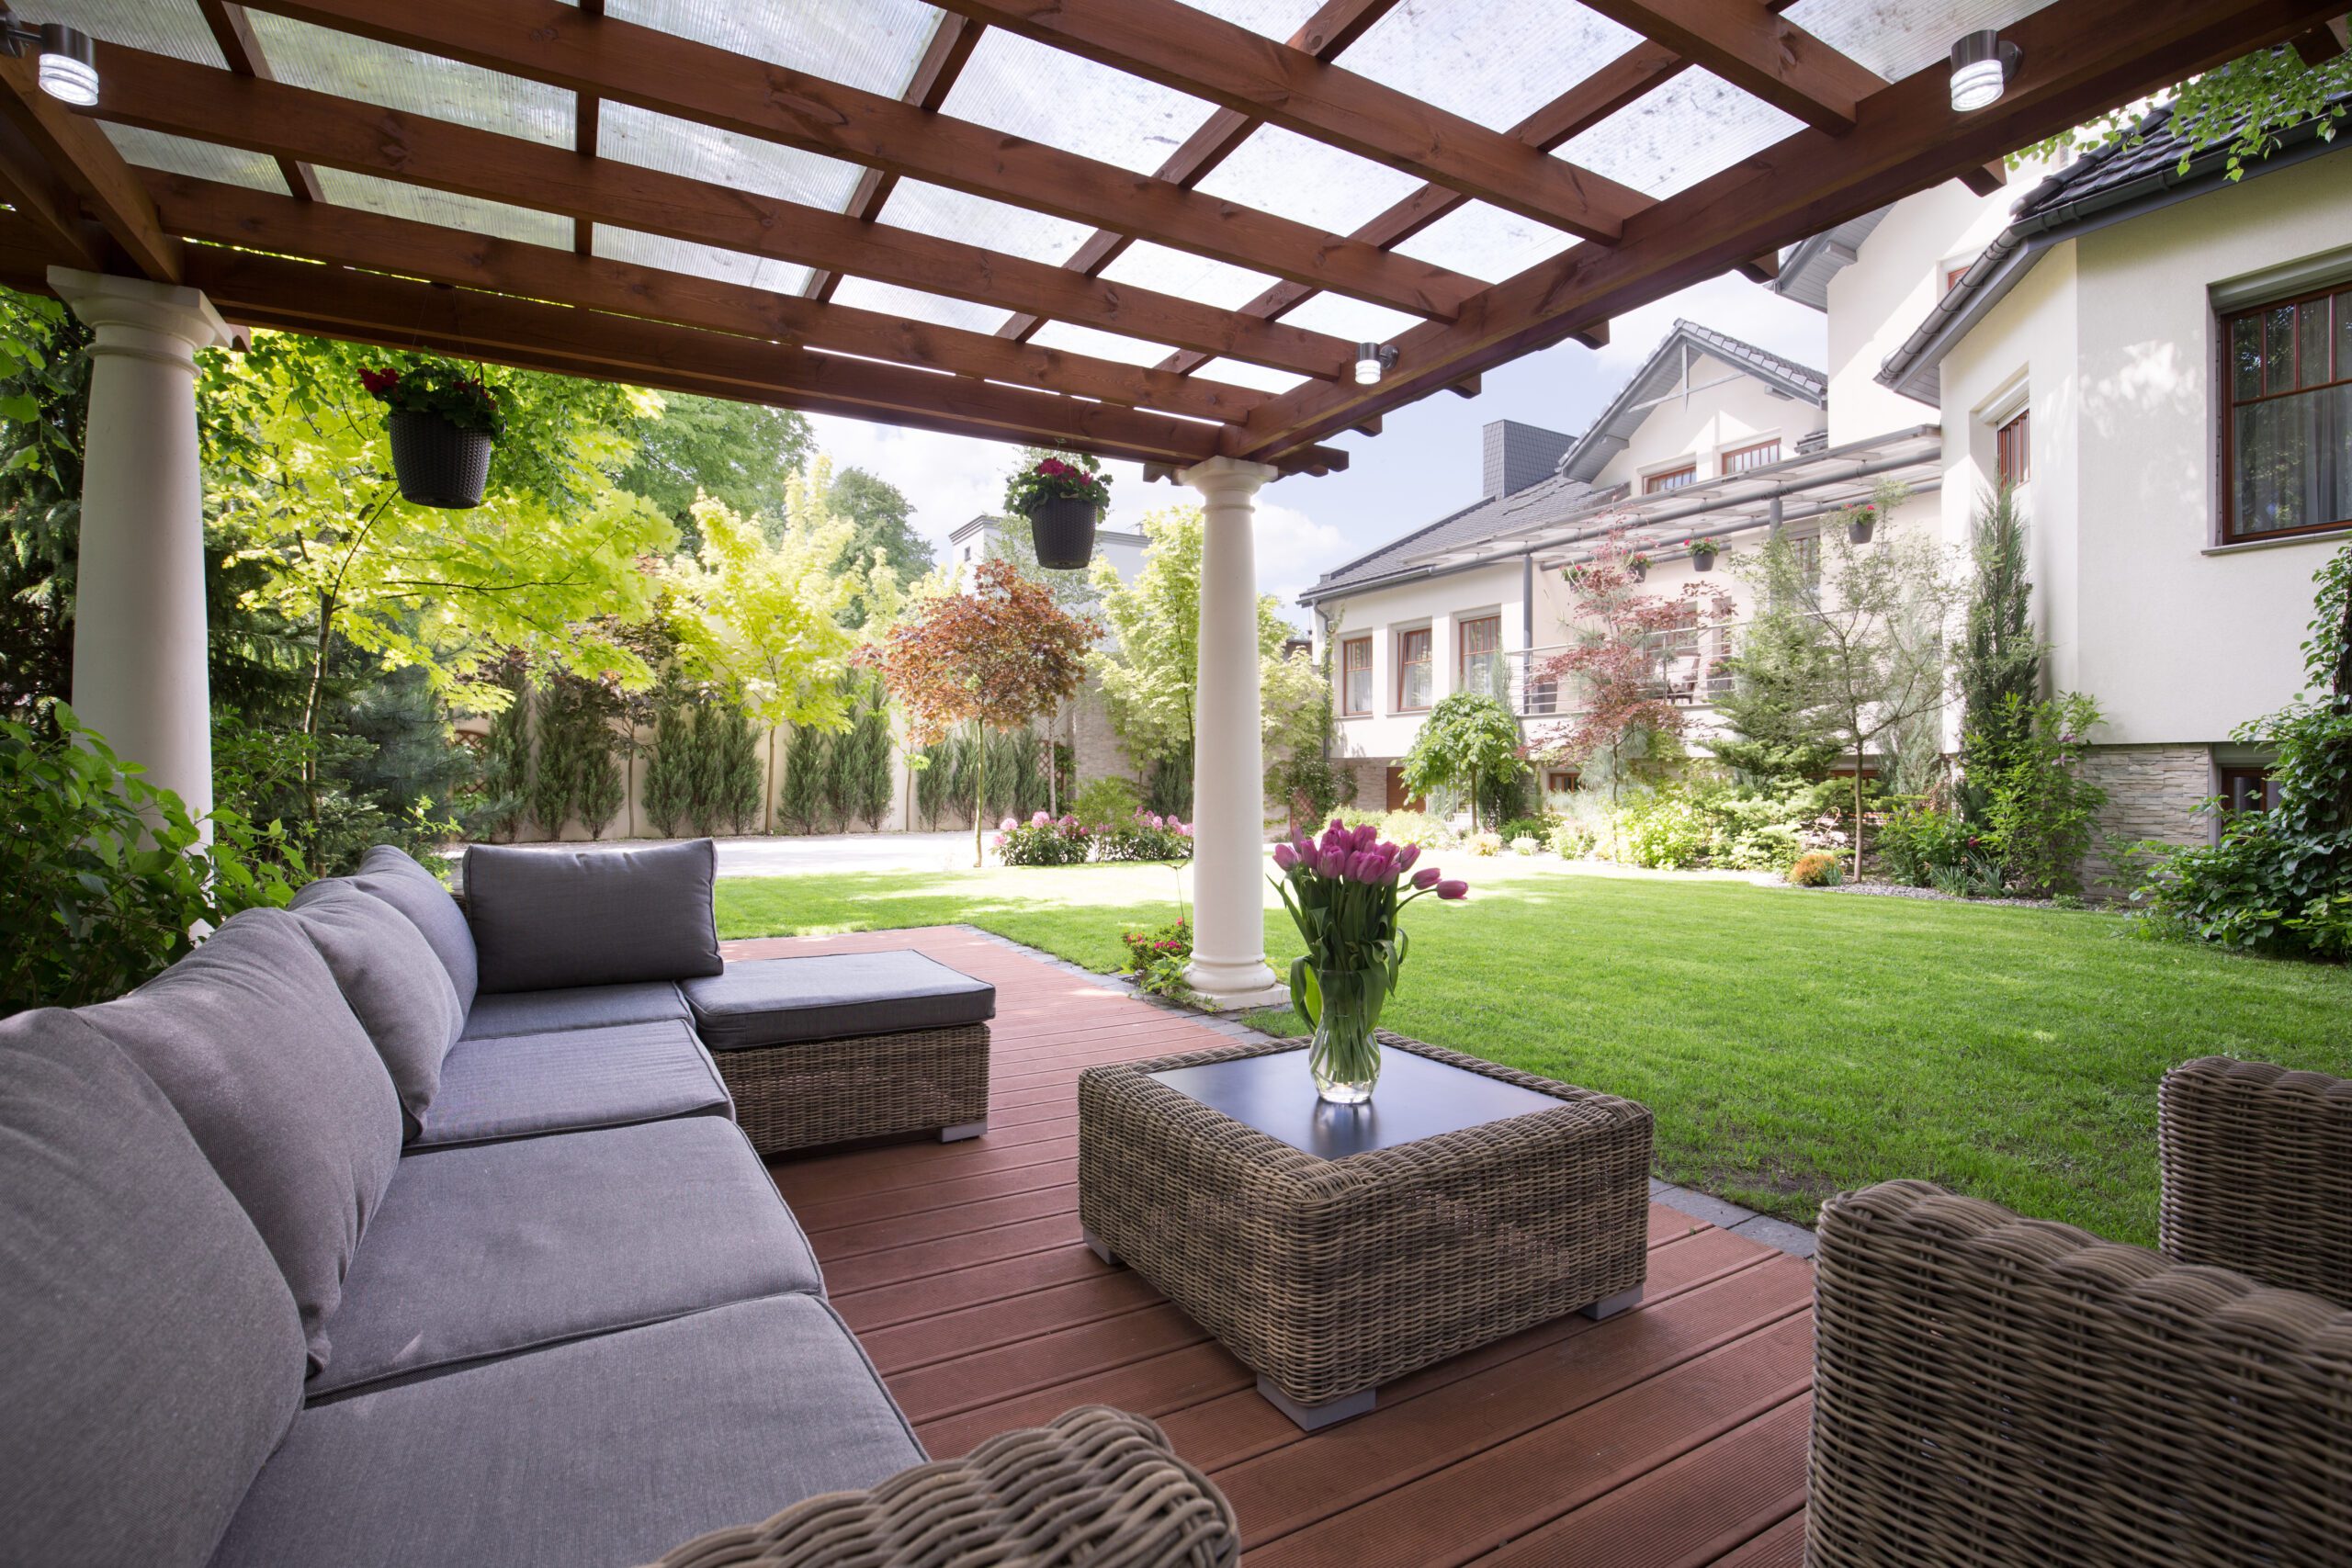 How to Make Your Yard Private Without a Fence